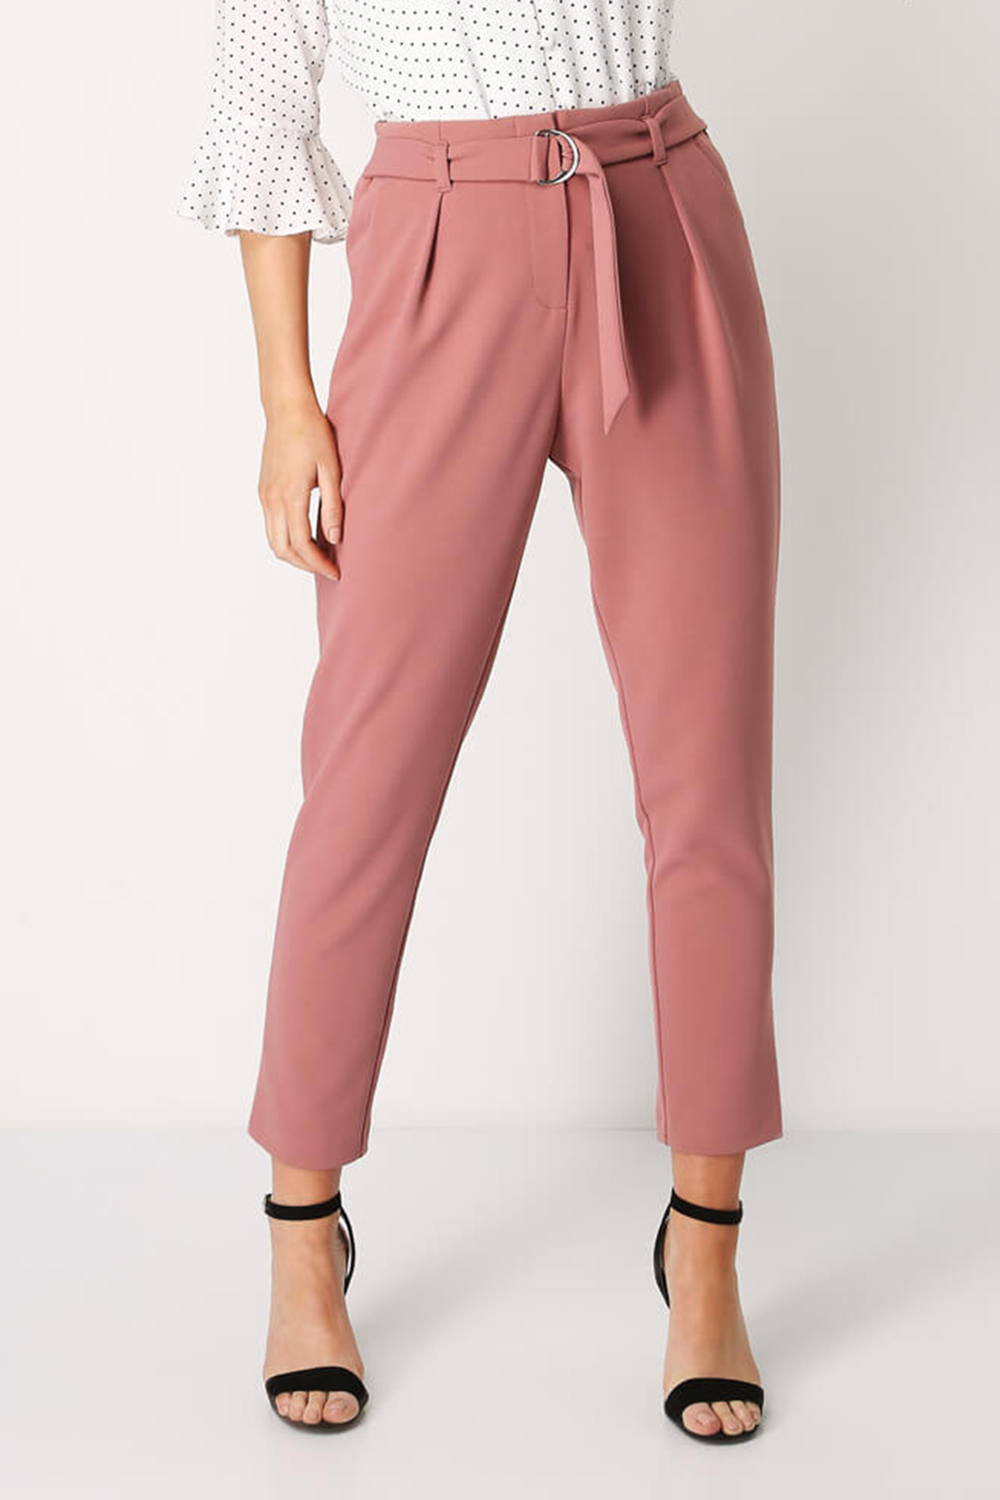 PINK Belted Tailored Trousers , Image 2 of 5